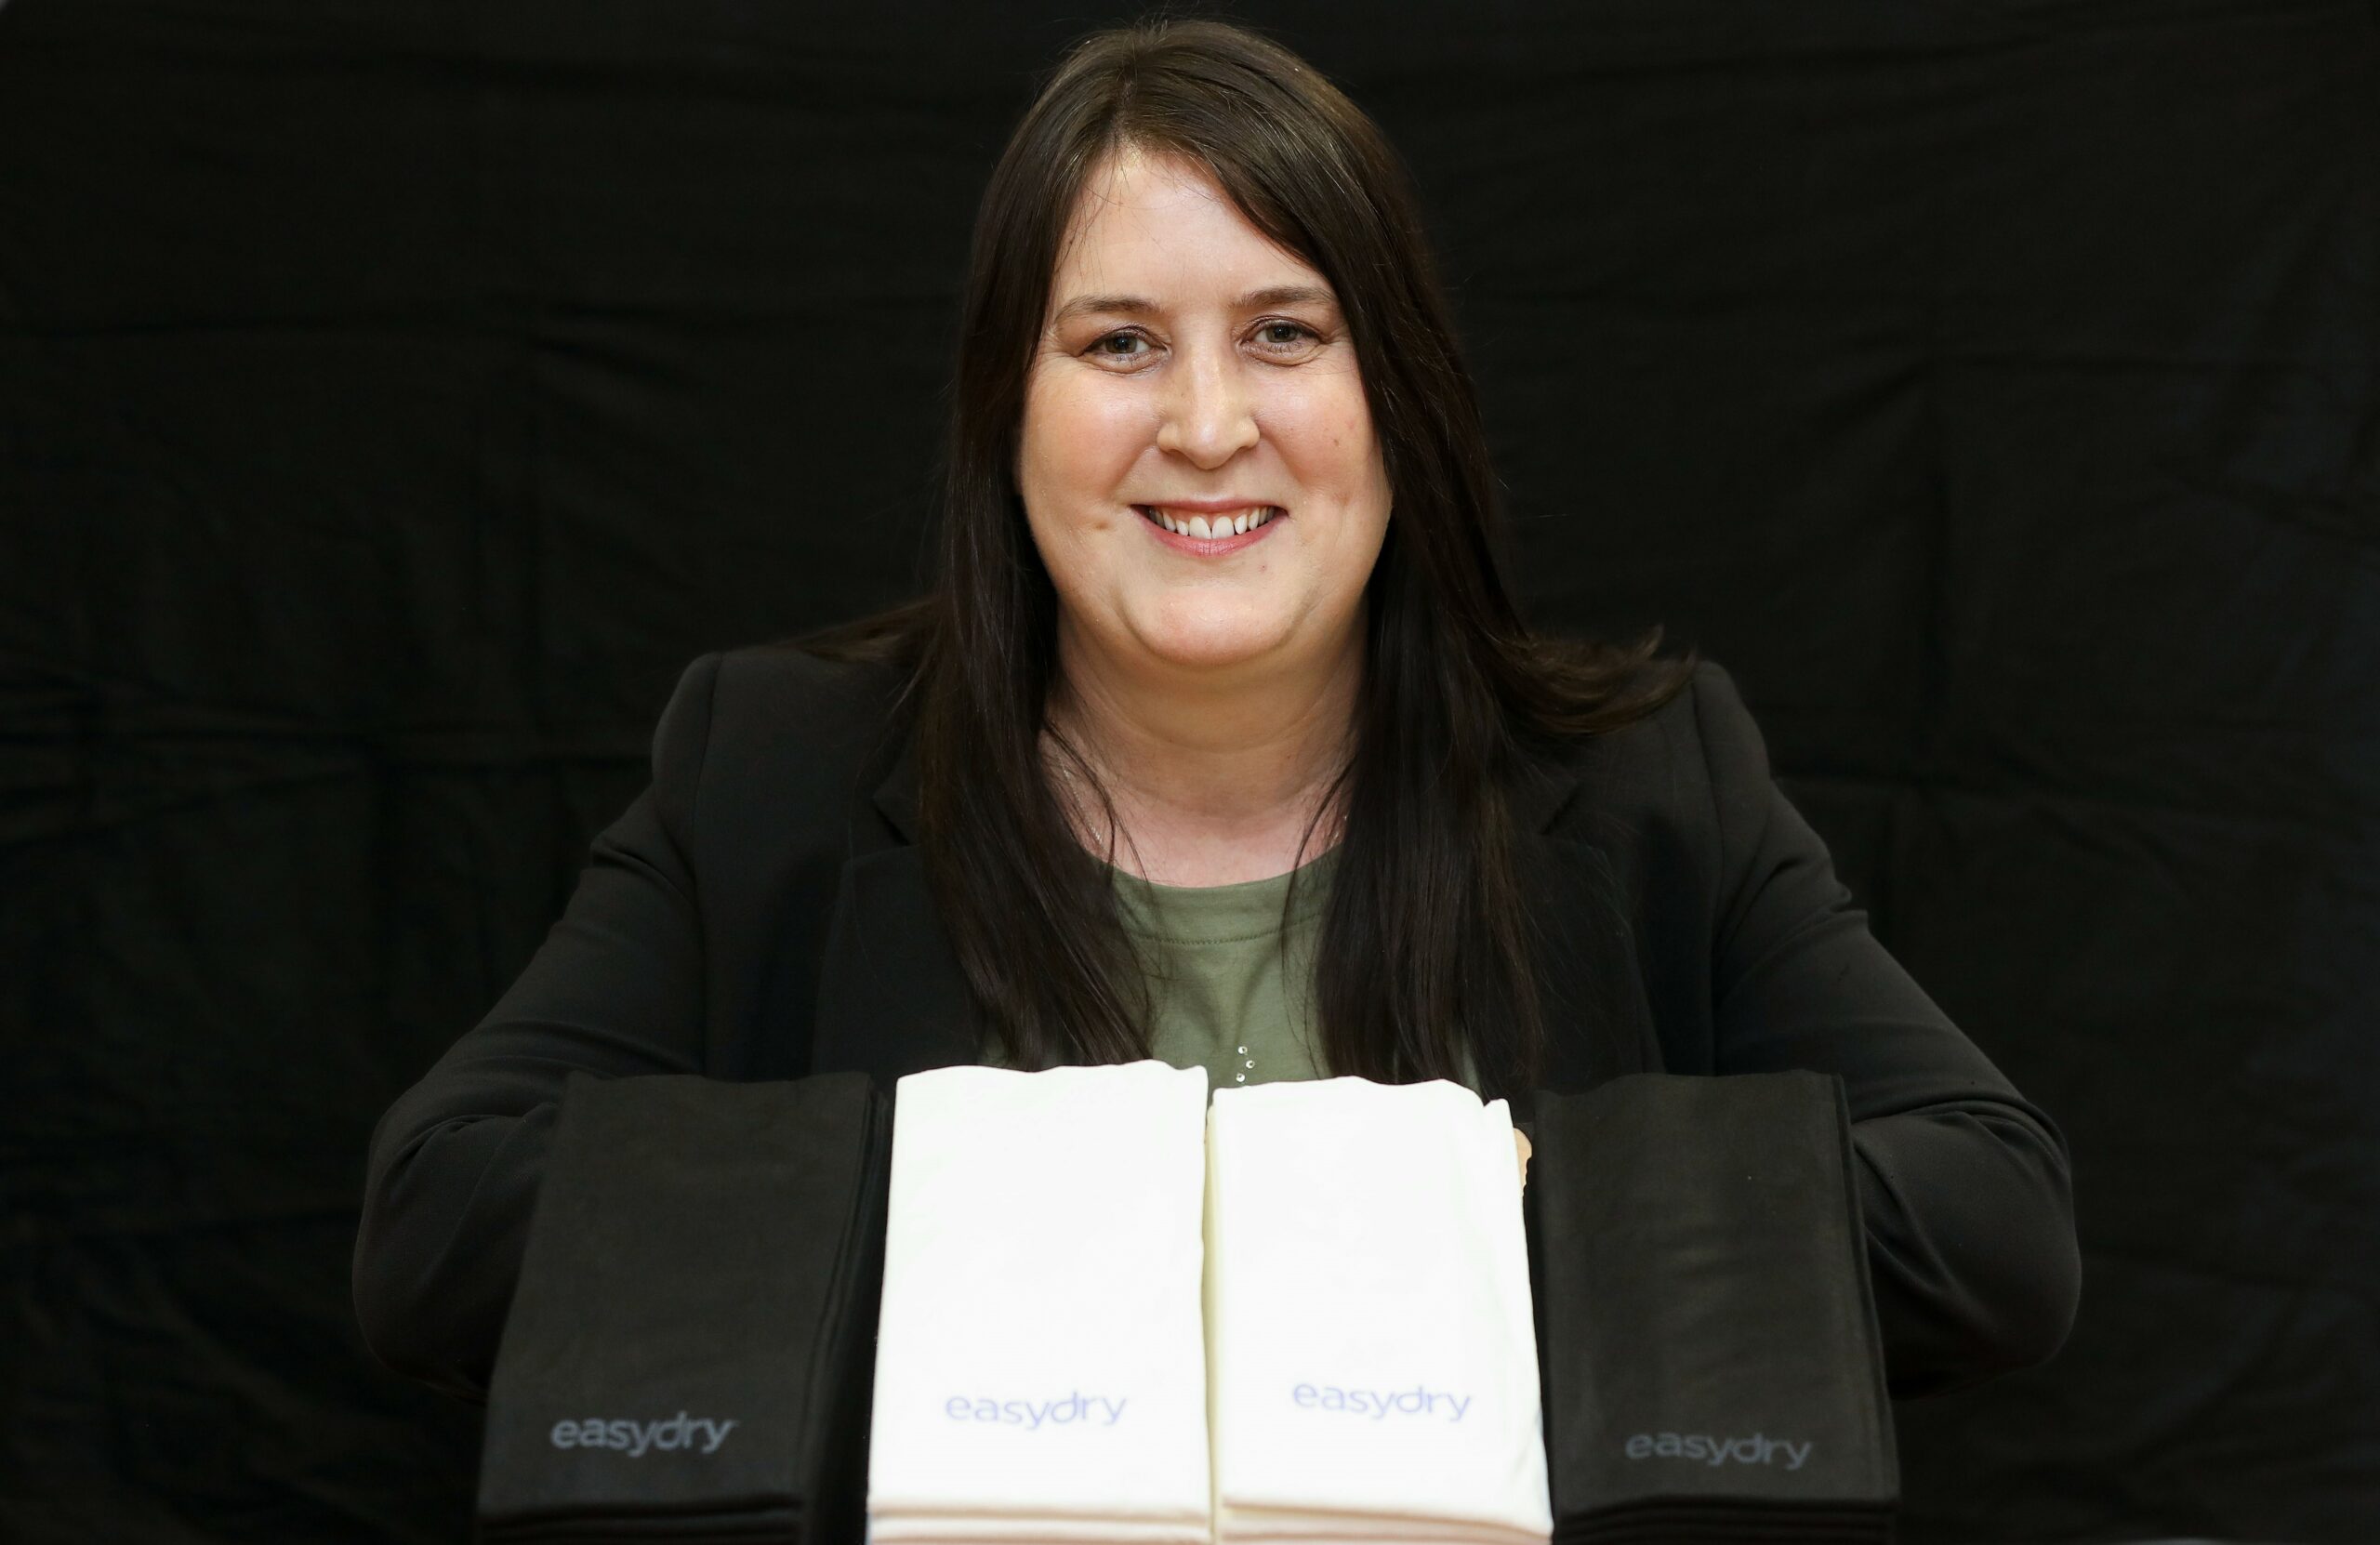 Anne Butterly CEO and Founder of Easydry